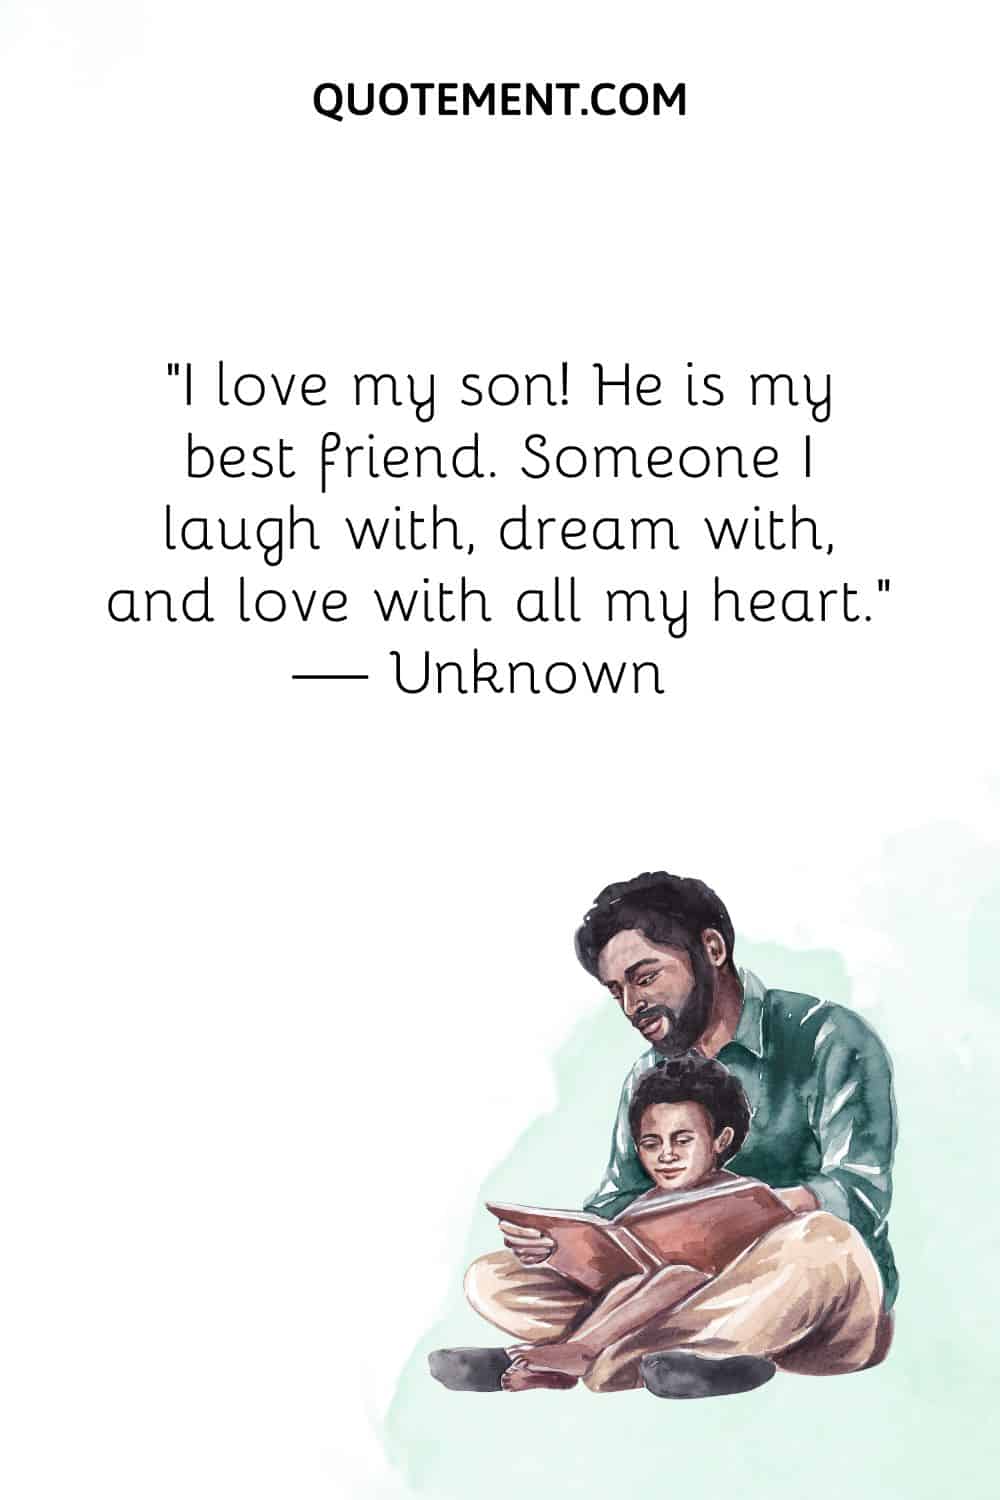 image of a dad and son reading representing love for my son quote